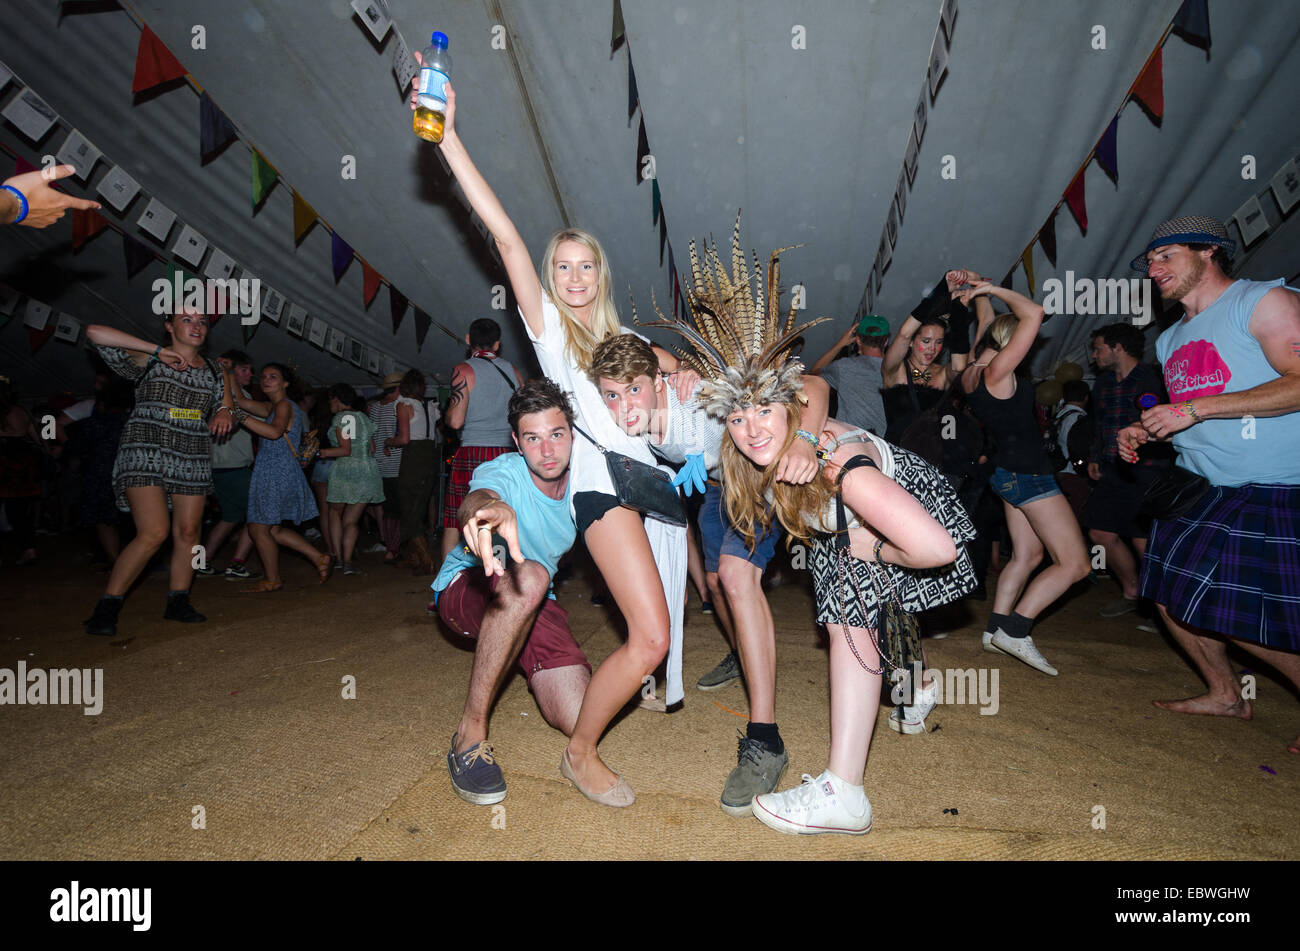 Young people posing for a photo at Secret Garden festival, United Kingdom Stock Photo